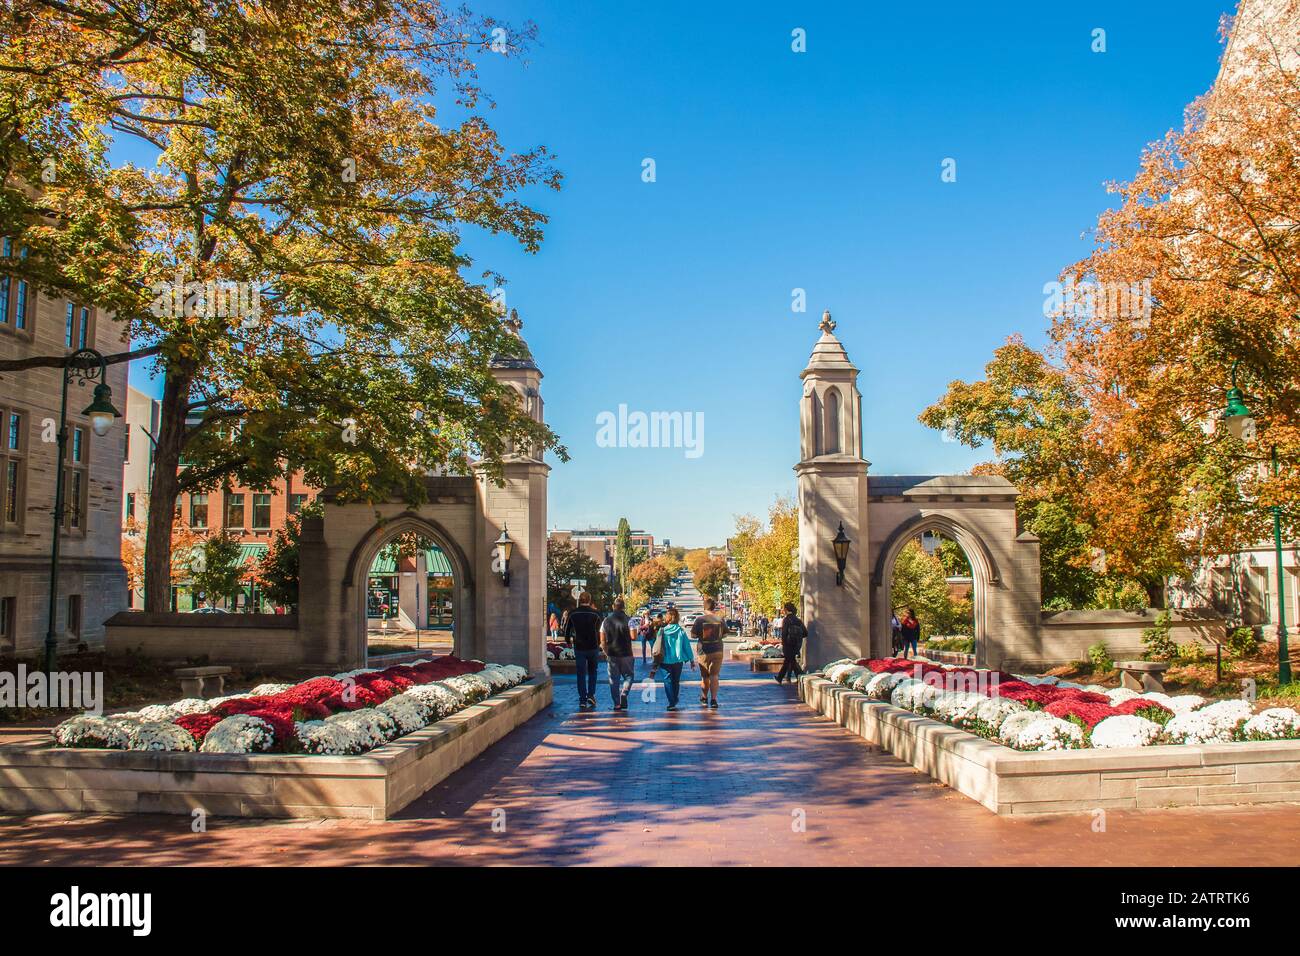 10-19-2019 Bloomington USA - University of Indiana - Family Walks with College Student out main Gates of Campus down into the town during Fall Break w Stockfoto